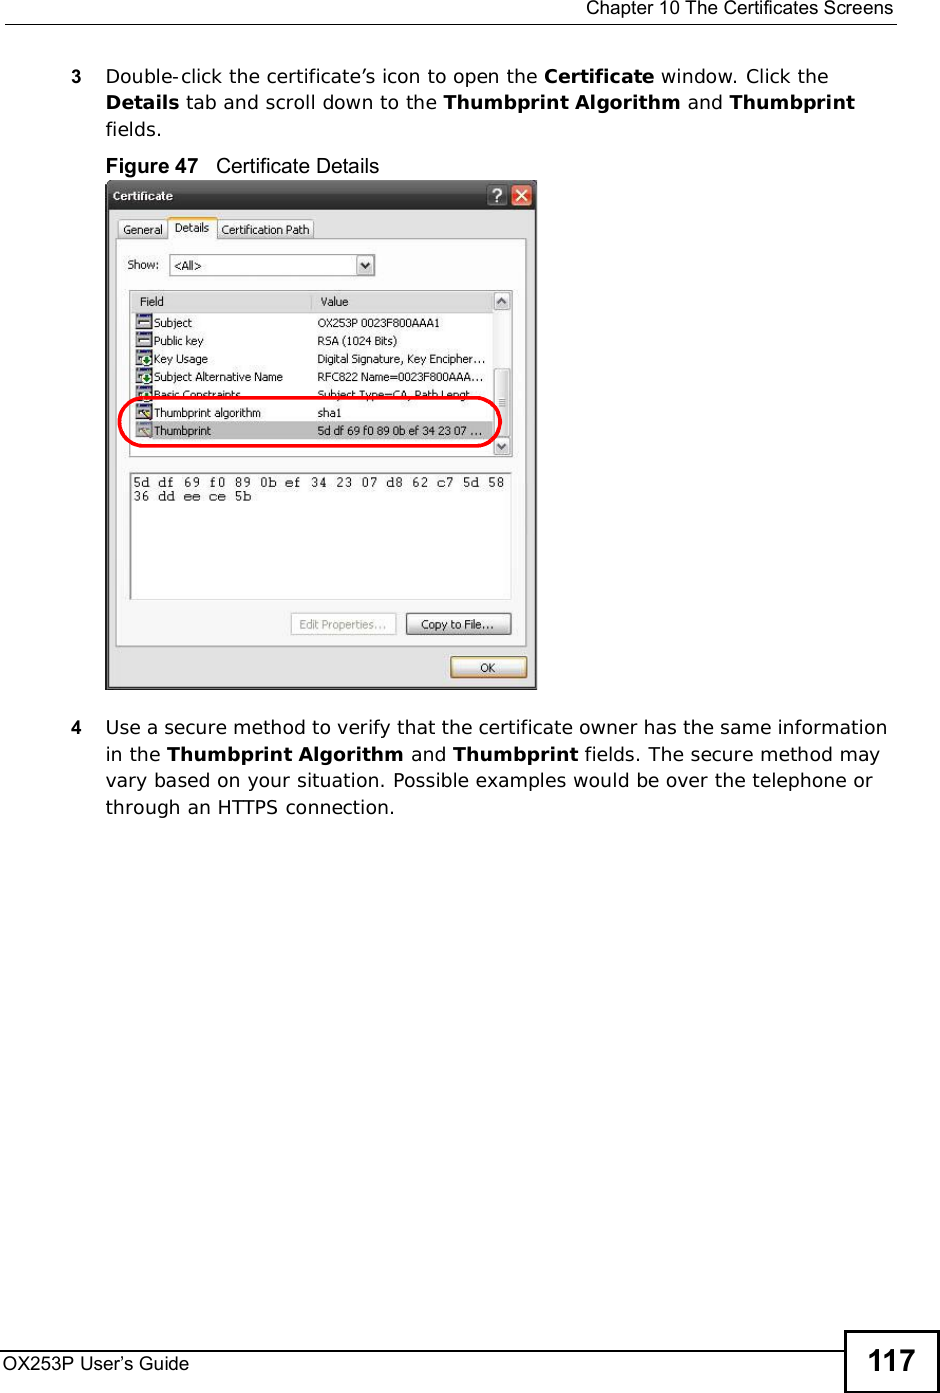  Chapter 10The Certificates ScreensOX253P User’s Guide 1173Double-click the certificate’s icon to open the Certificate window. Click the Details tab and scroll down to the Thumbprint Algorithm and Thumbprintfields.Figure 47   Certificate Details 4Use a secure method to verify that the certificate owner has the same information in the Thumbprint Algorithm and Thumbprint fields. The secure method may vary based on your situation. Possible examples would be over the telephone or through an HTTPS connection. 